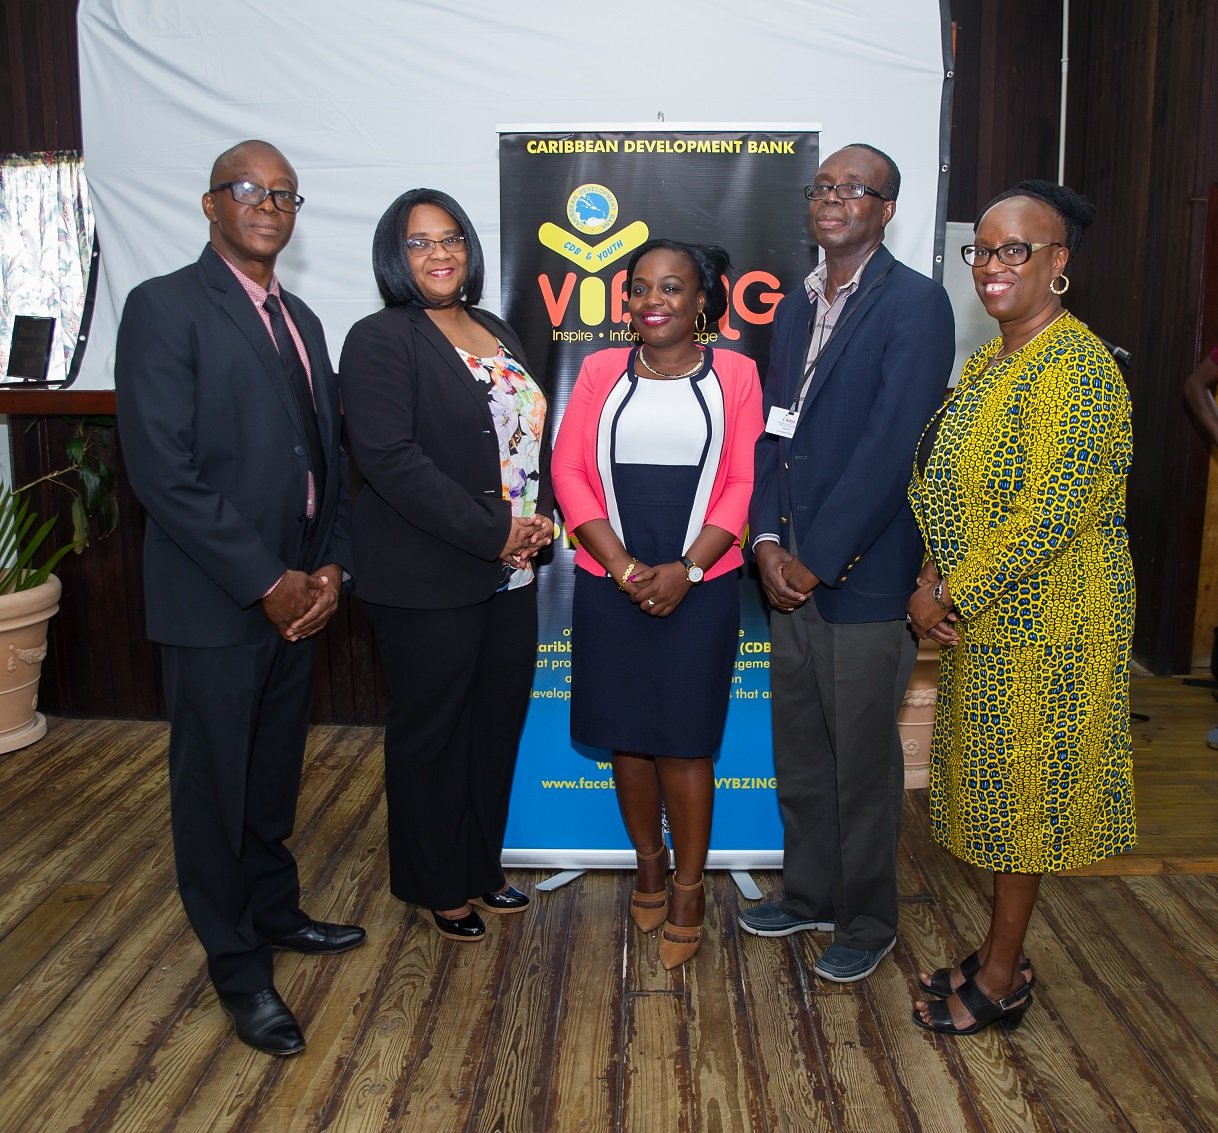 L to R: Dr. Malachy Dottin, Director of Research, Ministry of Agriculture and Lands; Yvette Lemonias Seale, Vice-President (Corporate Services) and Bank Secretary’s Unit; Hon. Kate Lewis, Minister within the Ministry of Youth Development, Sports, Culture and the Arts; Prof. Leonard O’Garro, Director of the University of the West Indies, Cave Hill Campus, Centre for Food Security and Entrepreneurship; and Angela Parris, Consultant, CDB.